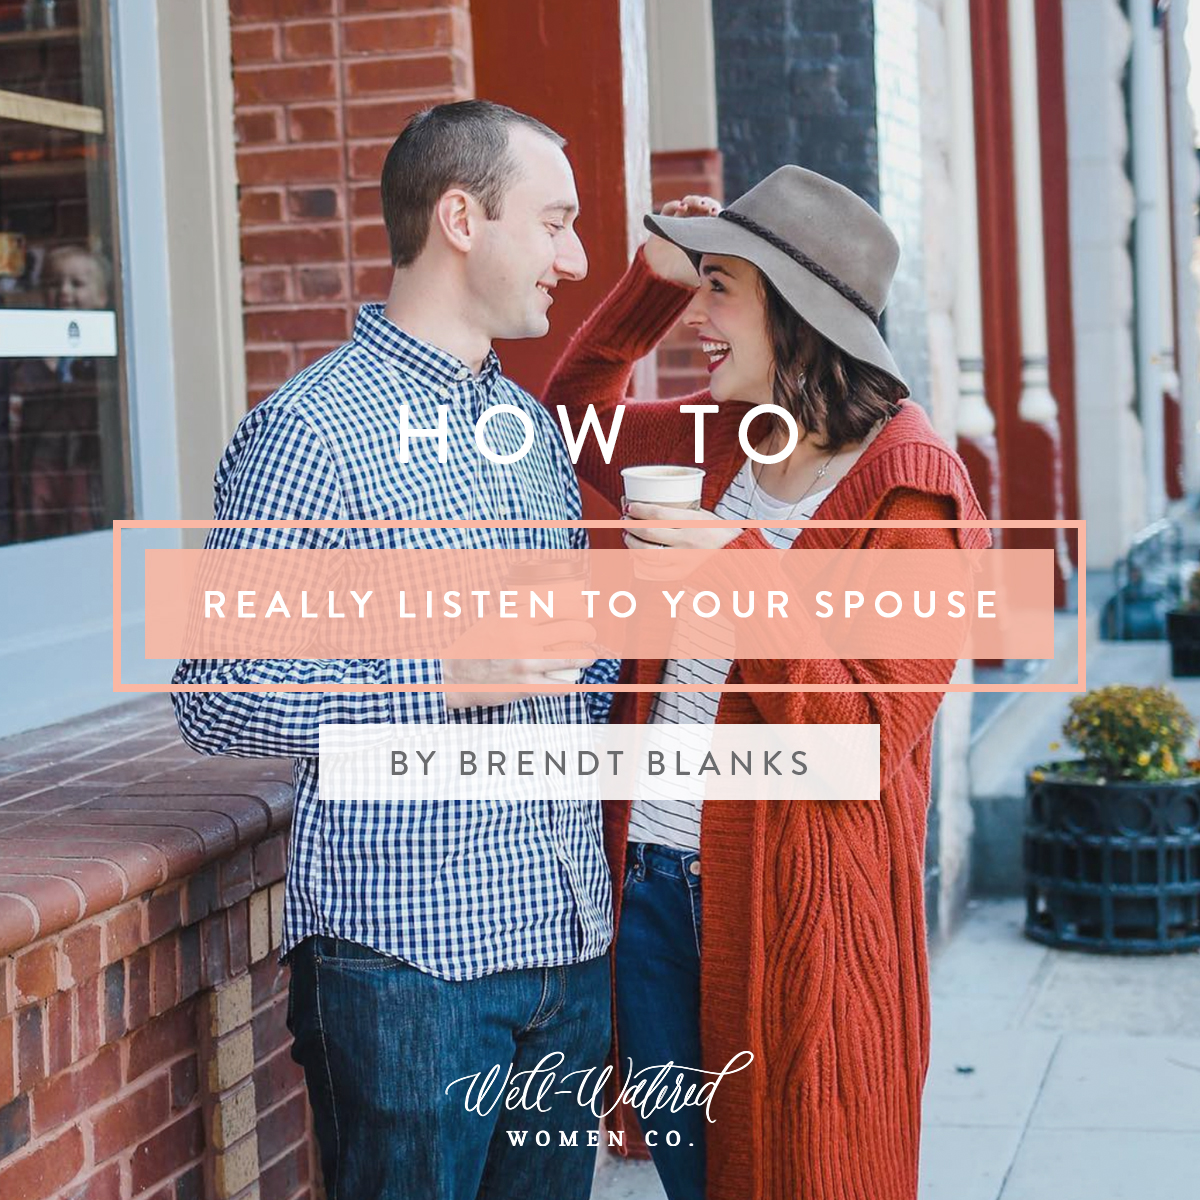 How to Listen to Your Spouse - Practical tips for enjoying quality time with your spouse. Christian marriage advice